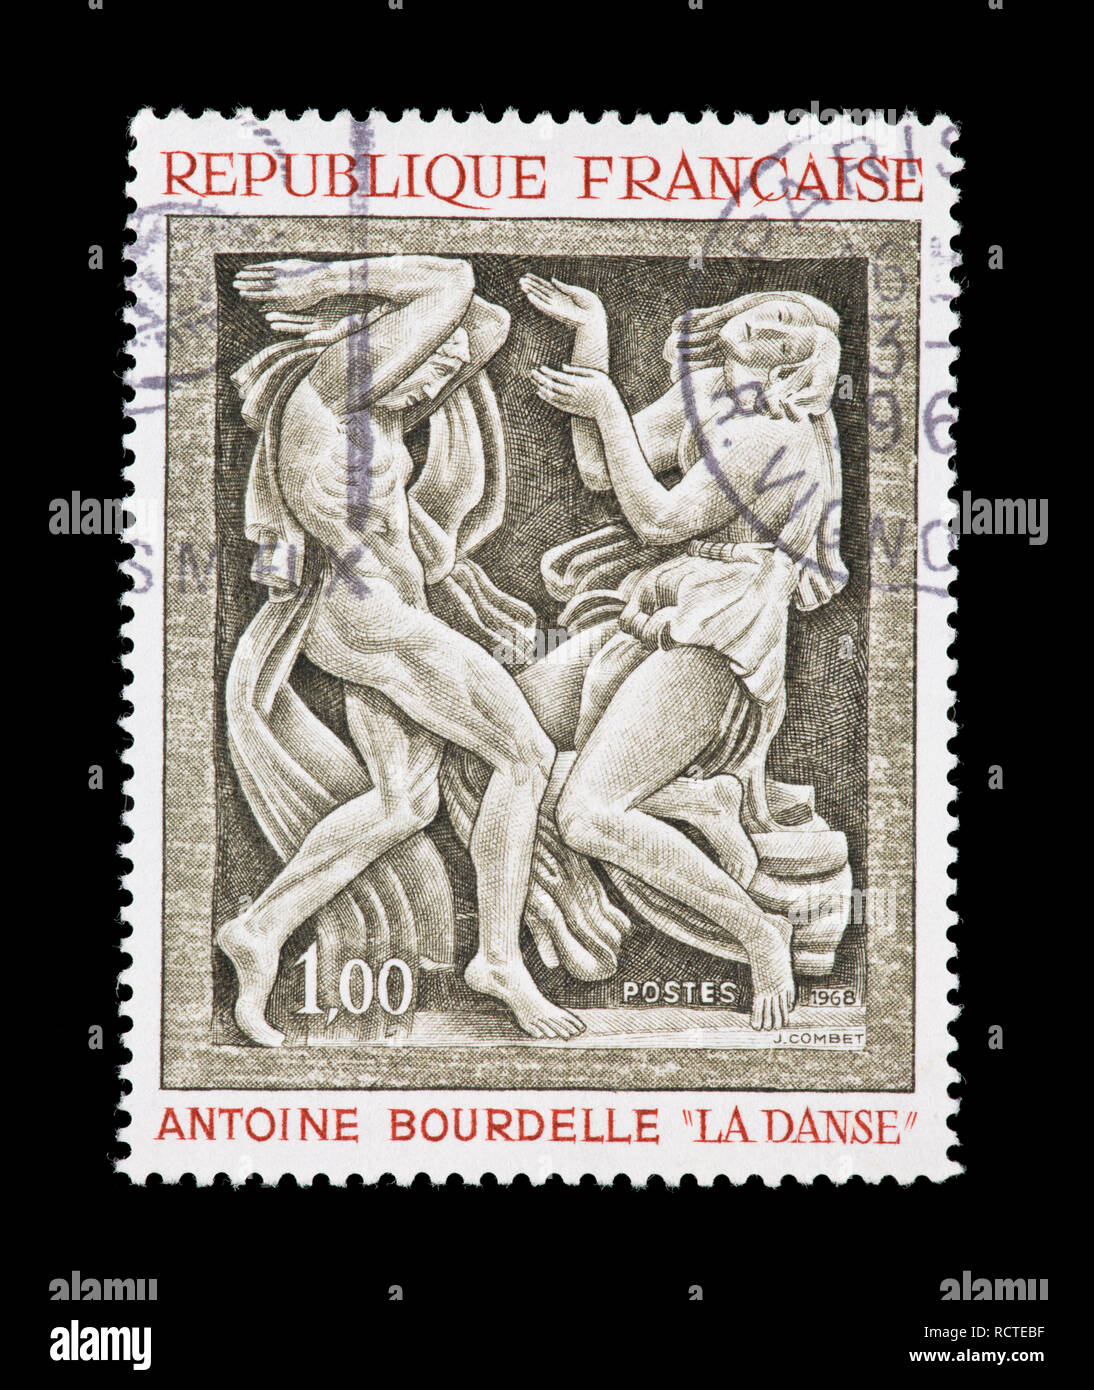 Postage stamp from France depicting the Emile Antoine Bourdelle art 'The Dance' Stock Photo